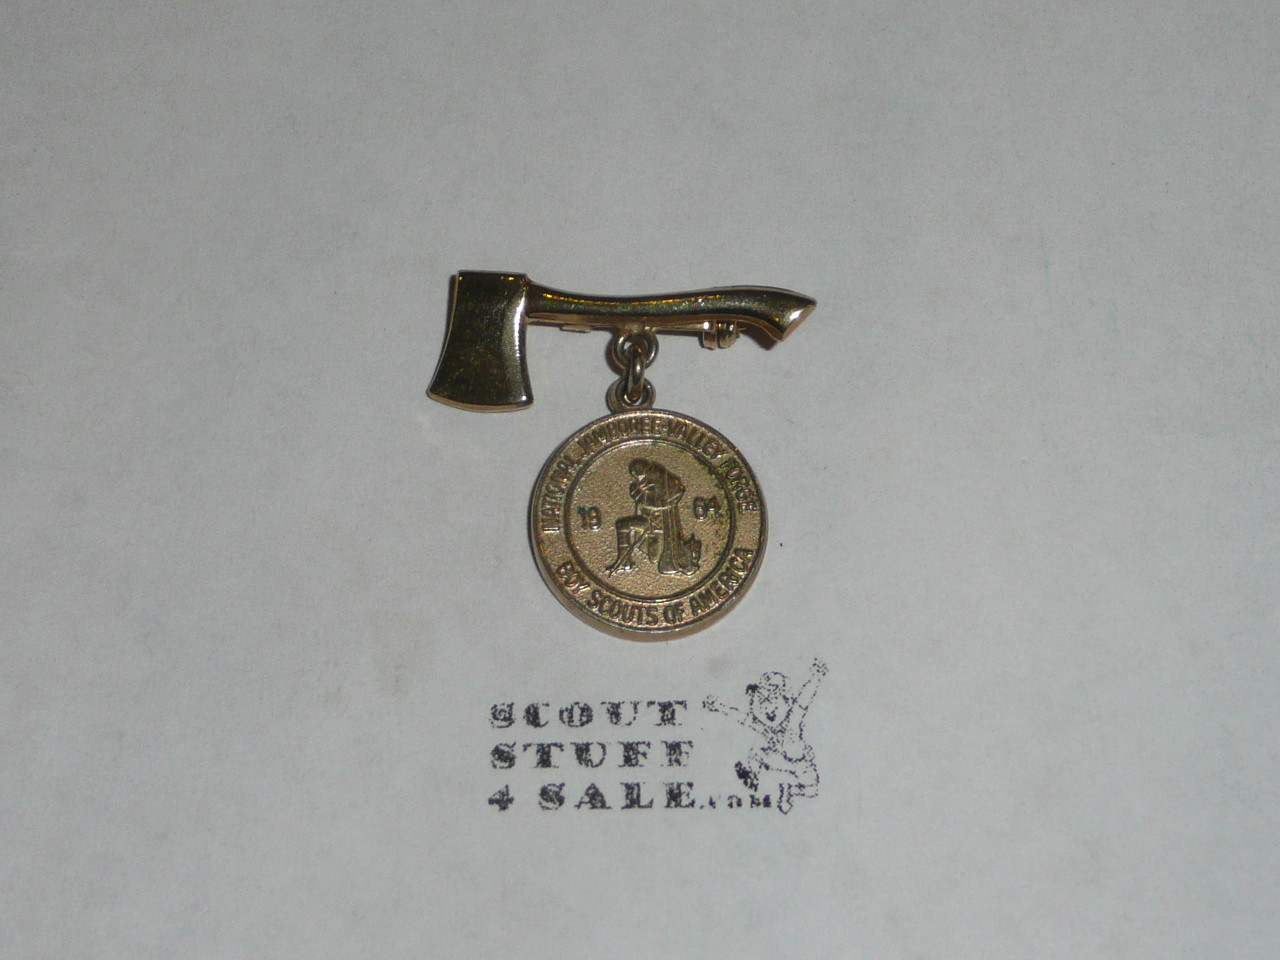 1964 National Jamboree Axe pin with Jamboree emblem suspended from it